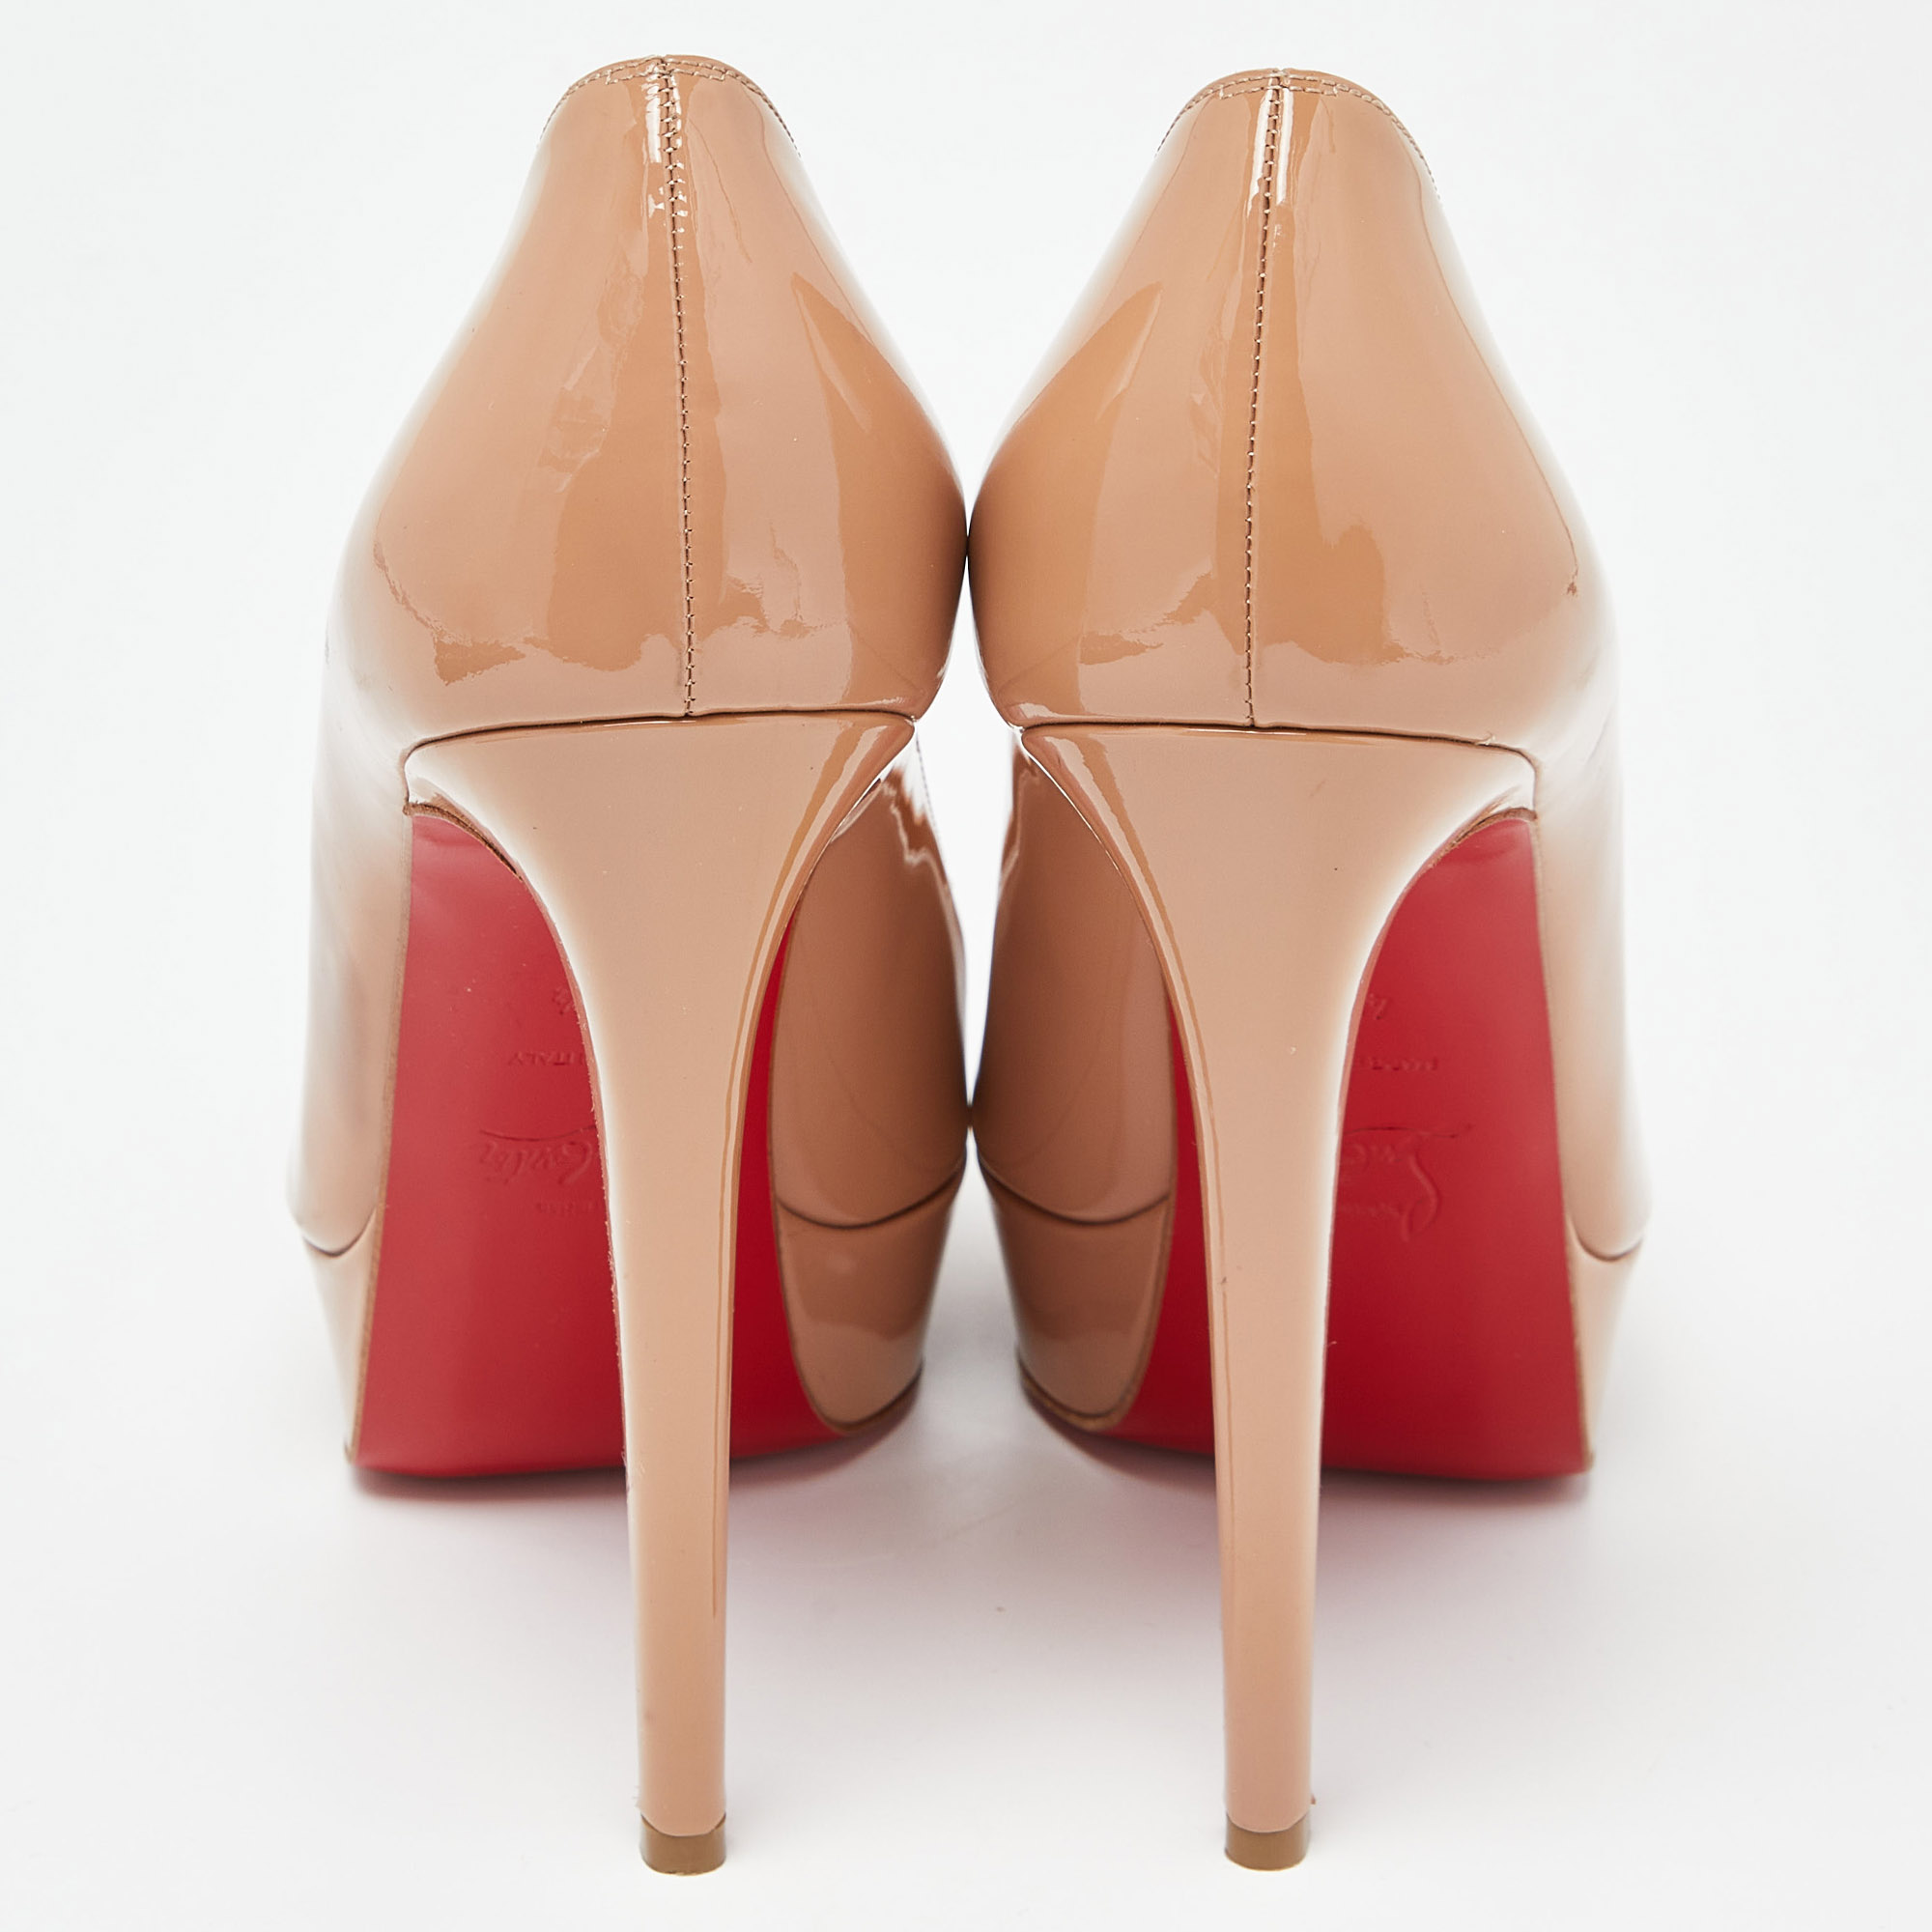 Christian Louboutin Beige Patent Leather Bianca Pumps Size 40.5